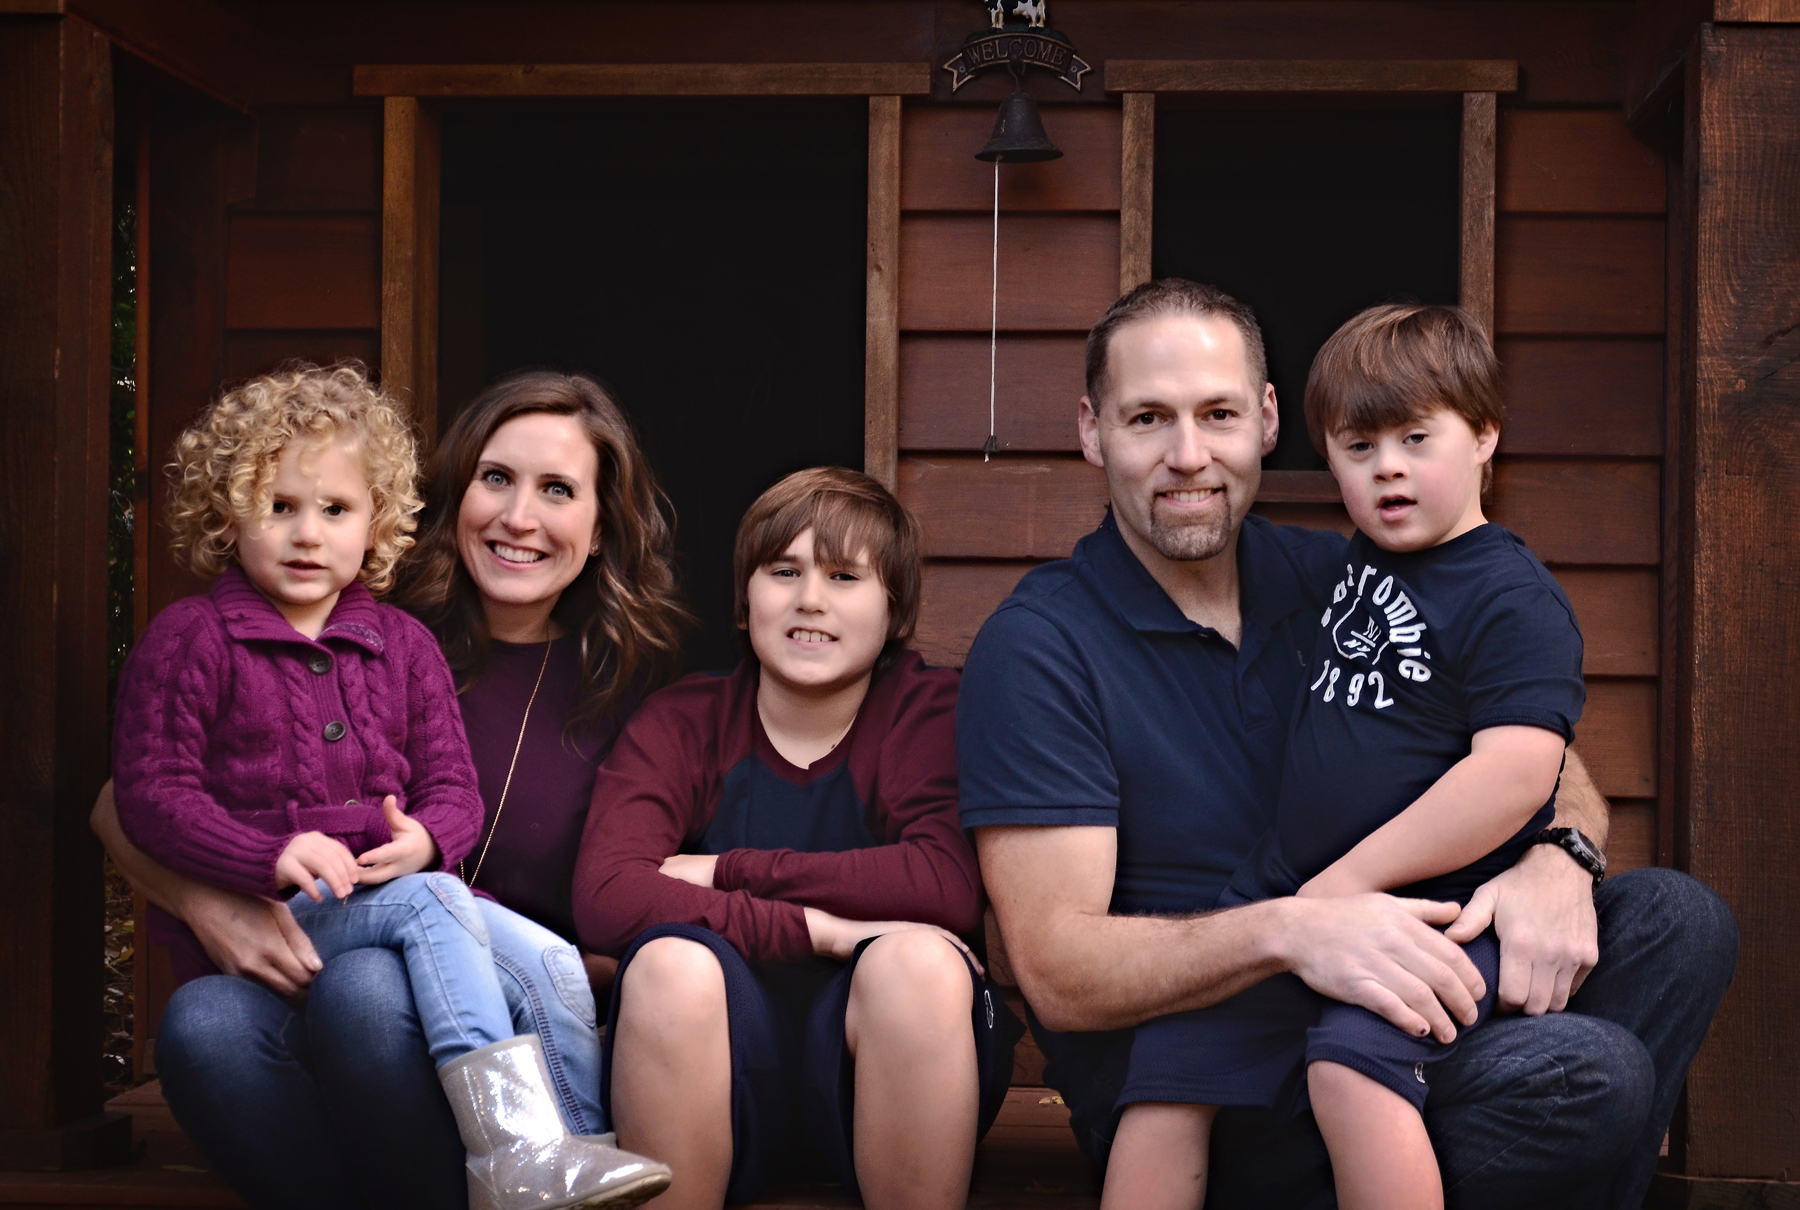 PHOTO: Jennifer Engele, 40, of Langley, British Columbia, photographed with her husband Ash Engele, 43, and their children, Harper, 4,Rowen, 10, and Sawyer, 8.